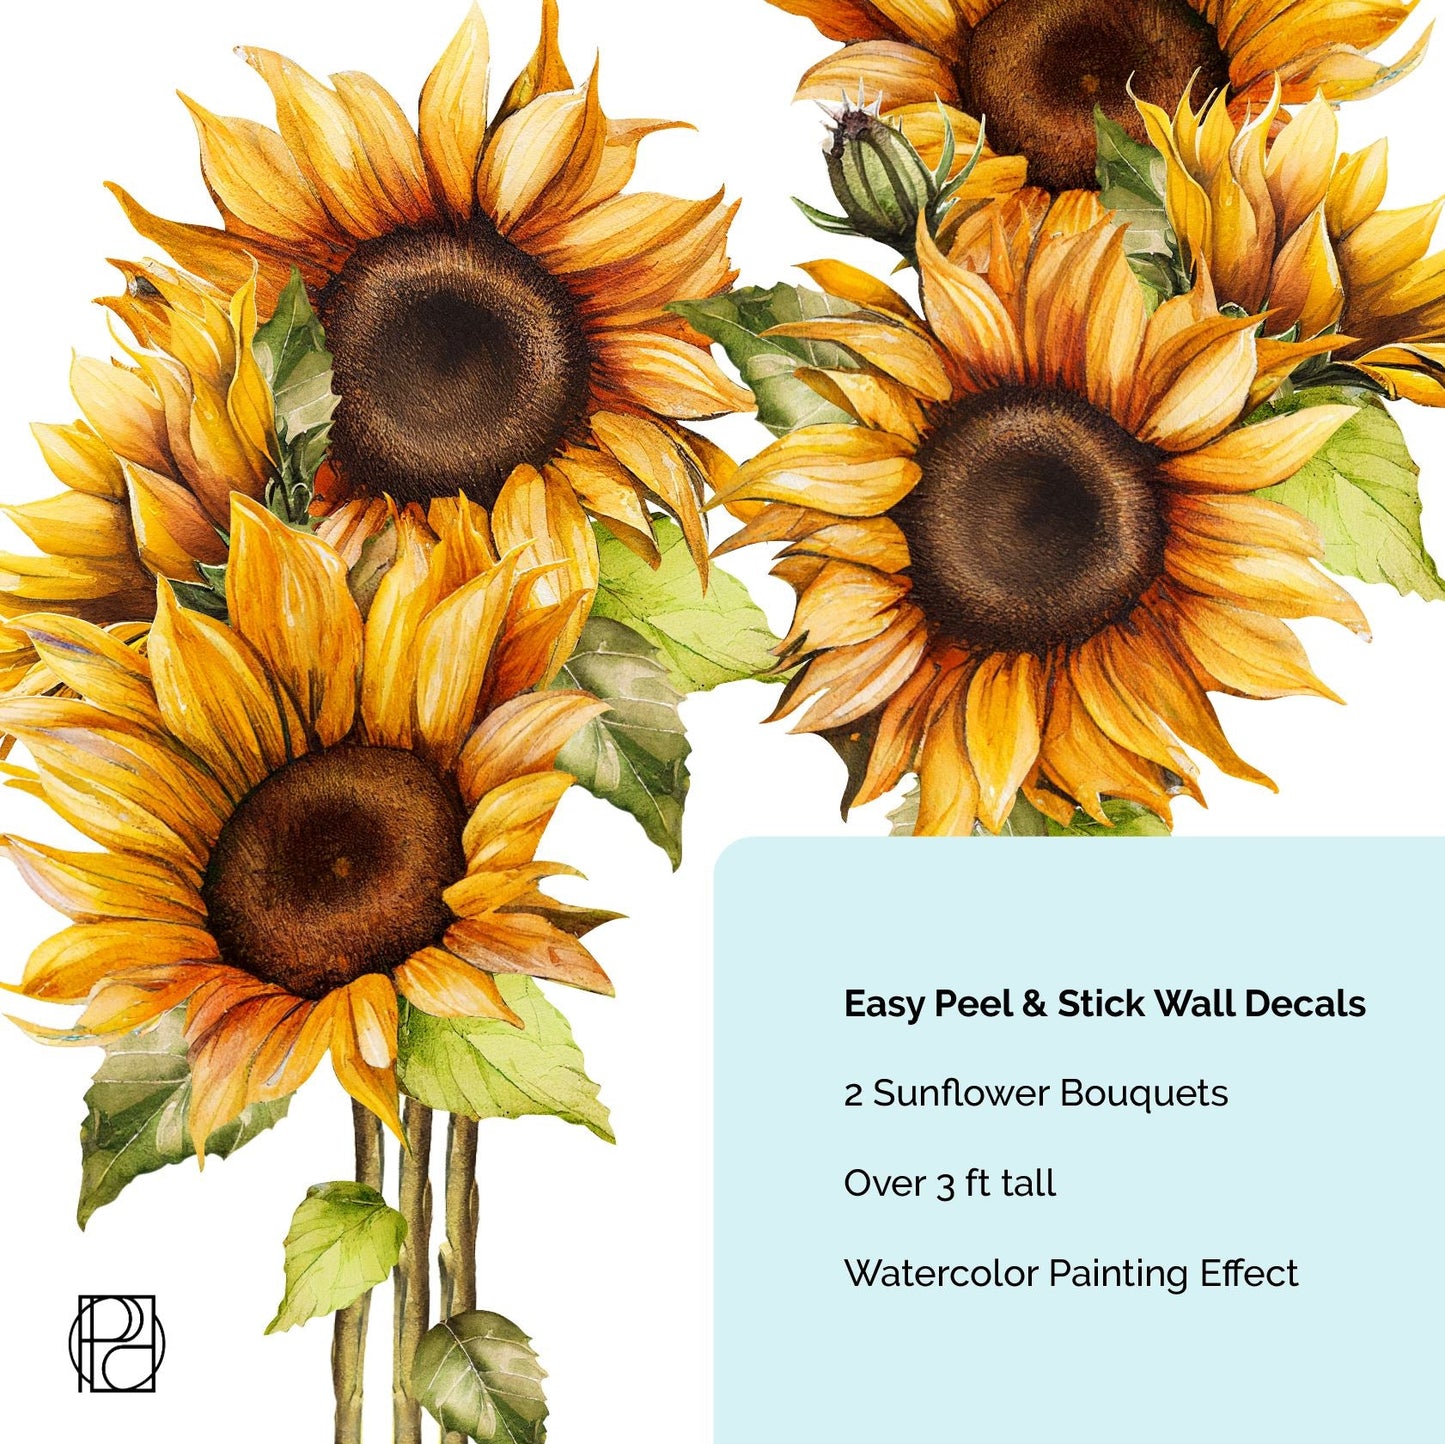 Sunflowers Wall Stickers | Sunflower with Stems Wall Décor | Sunflower Mural - Picture Perfect Decals